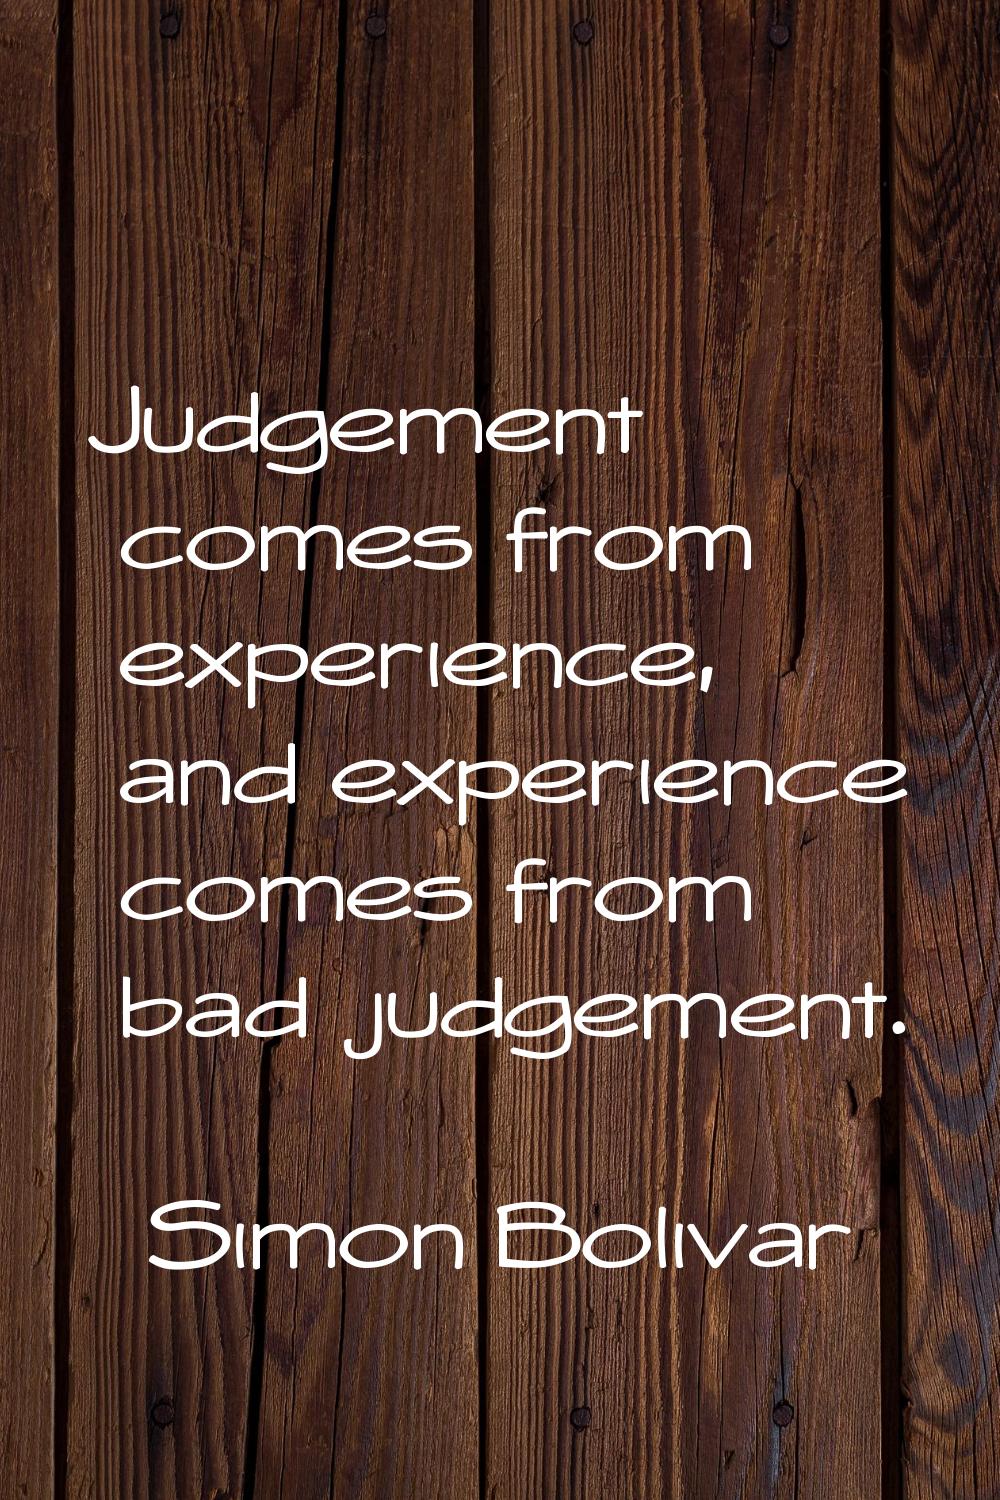 Judgement comes from experience, and experience comes from bad judgement.